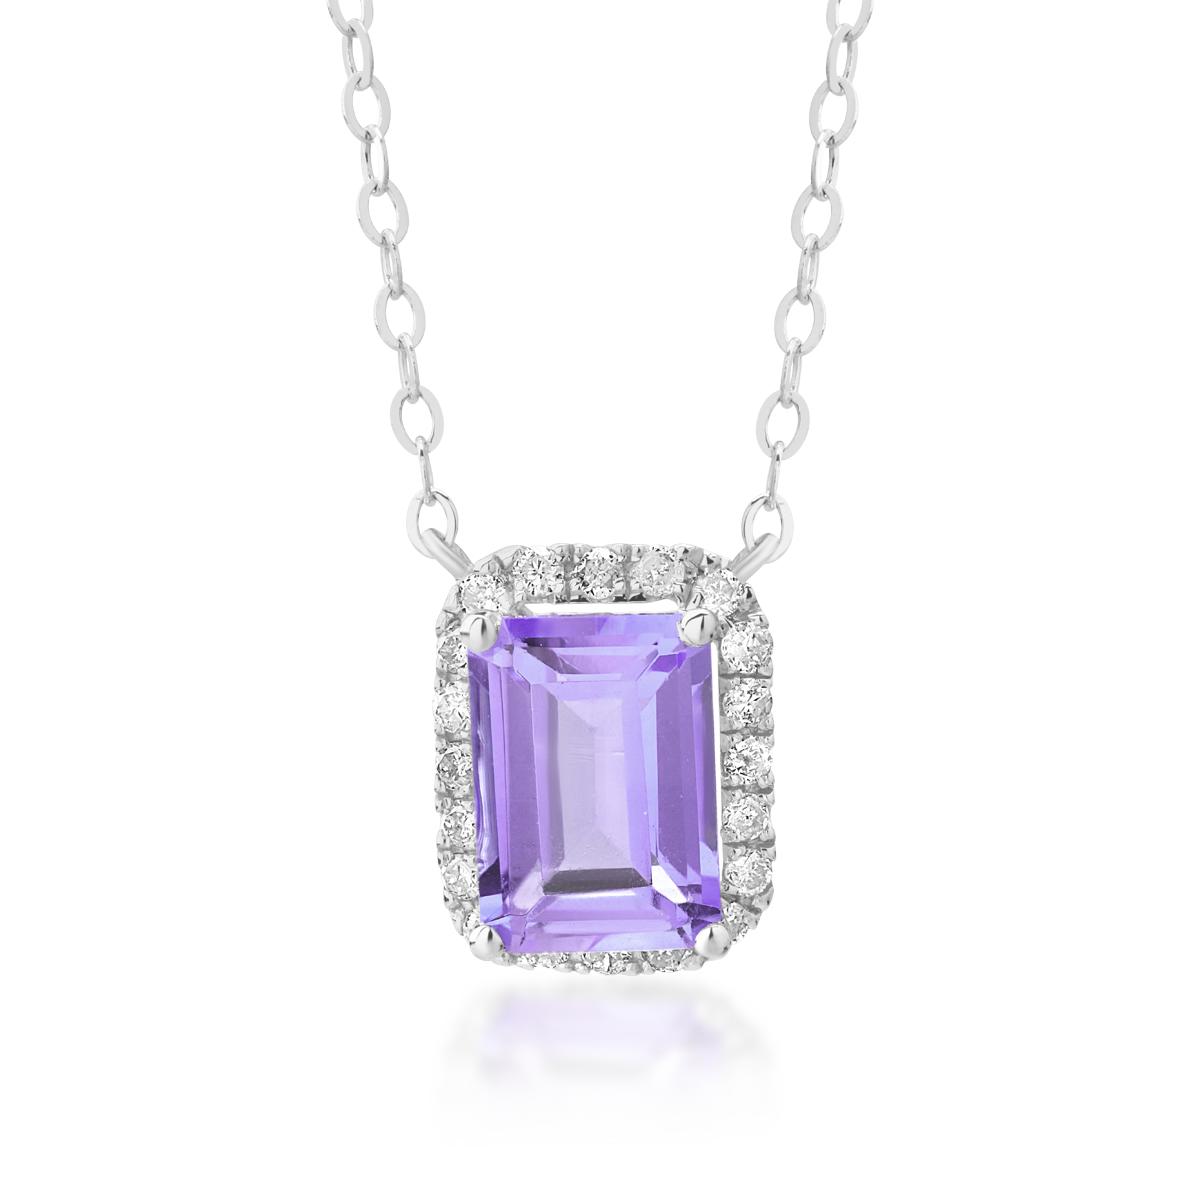 18K white gold pendant chain with 0.85ct amethyst and 0.12ct diamonds